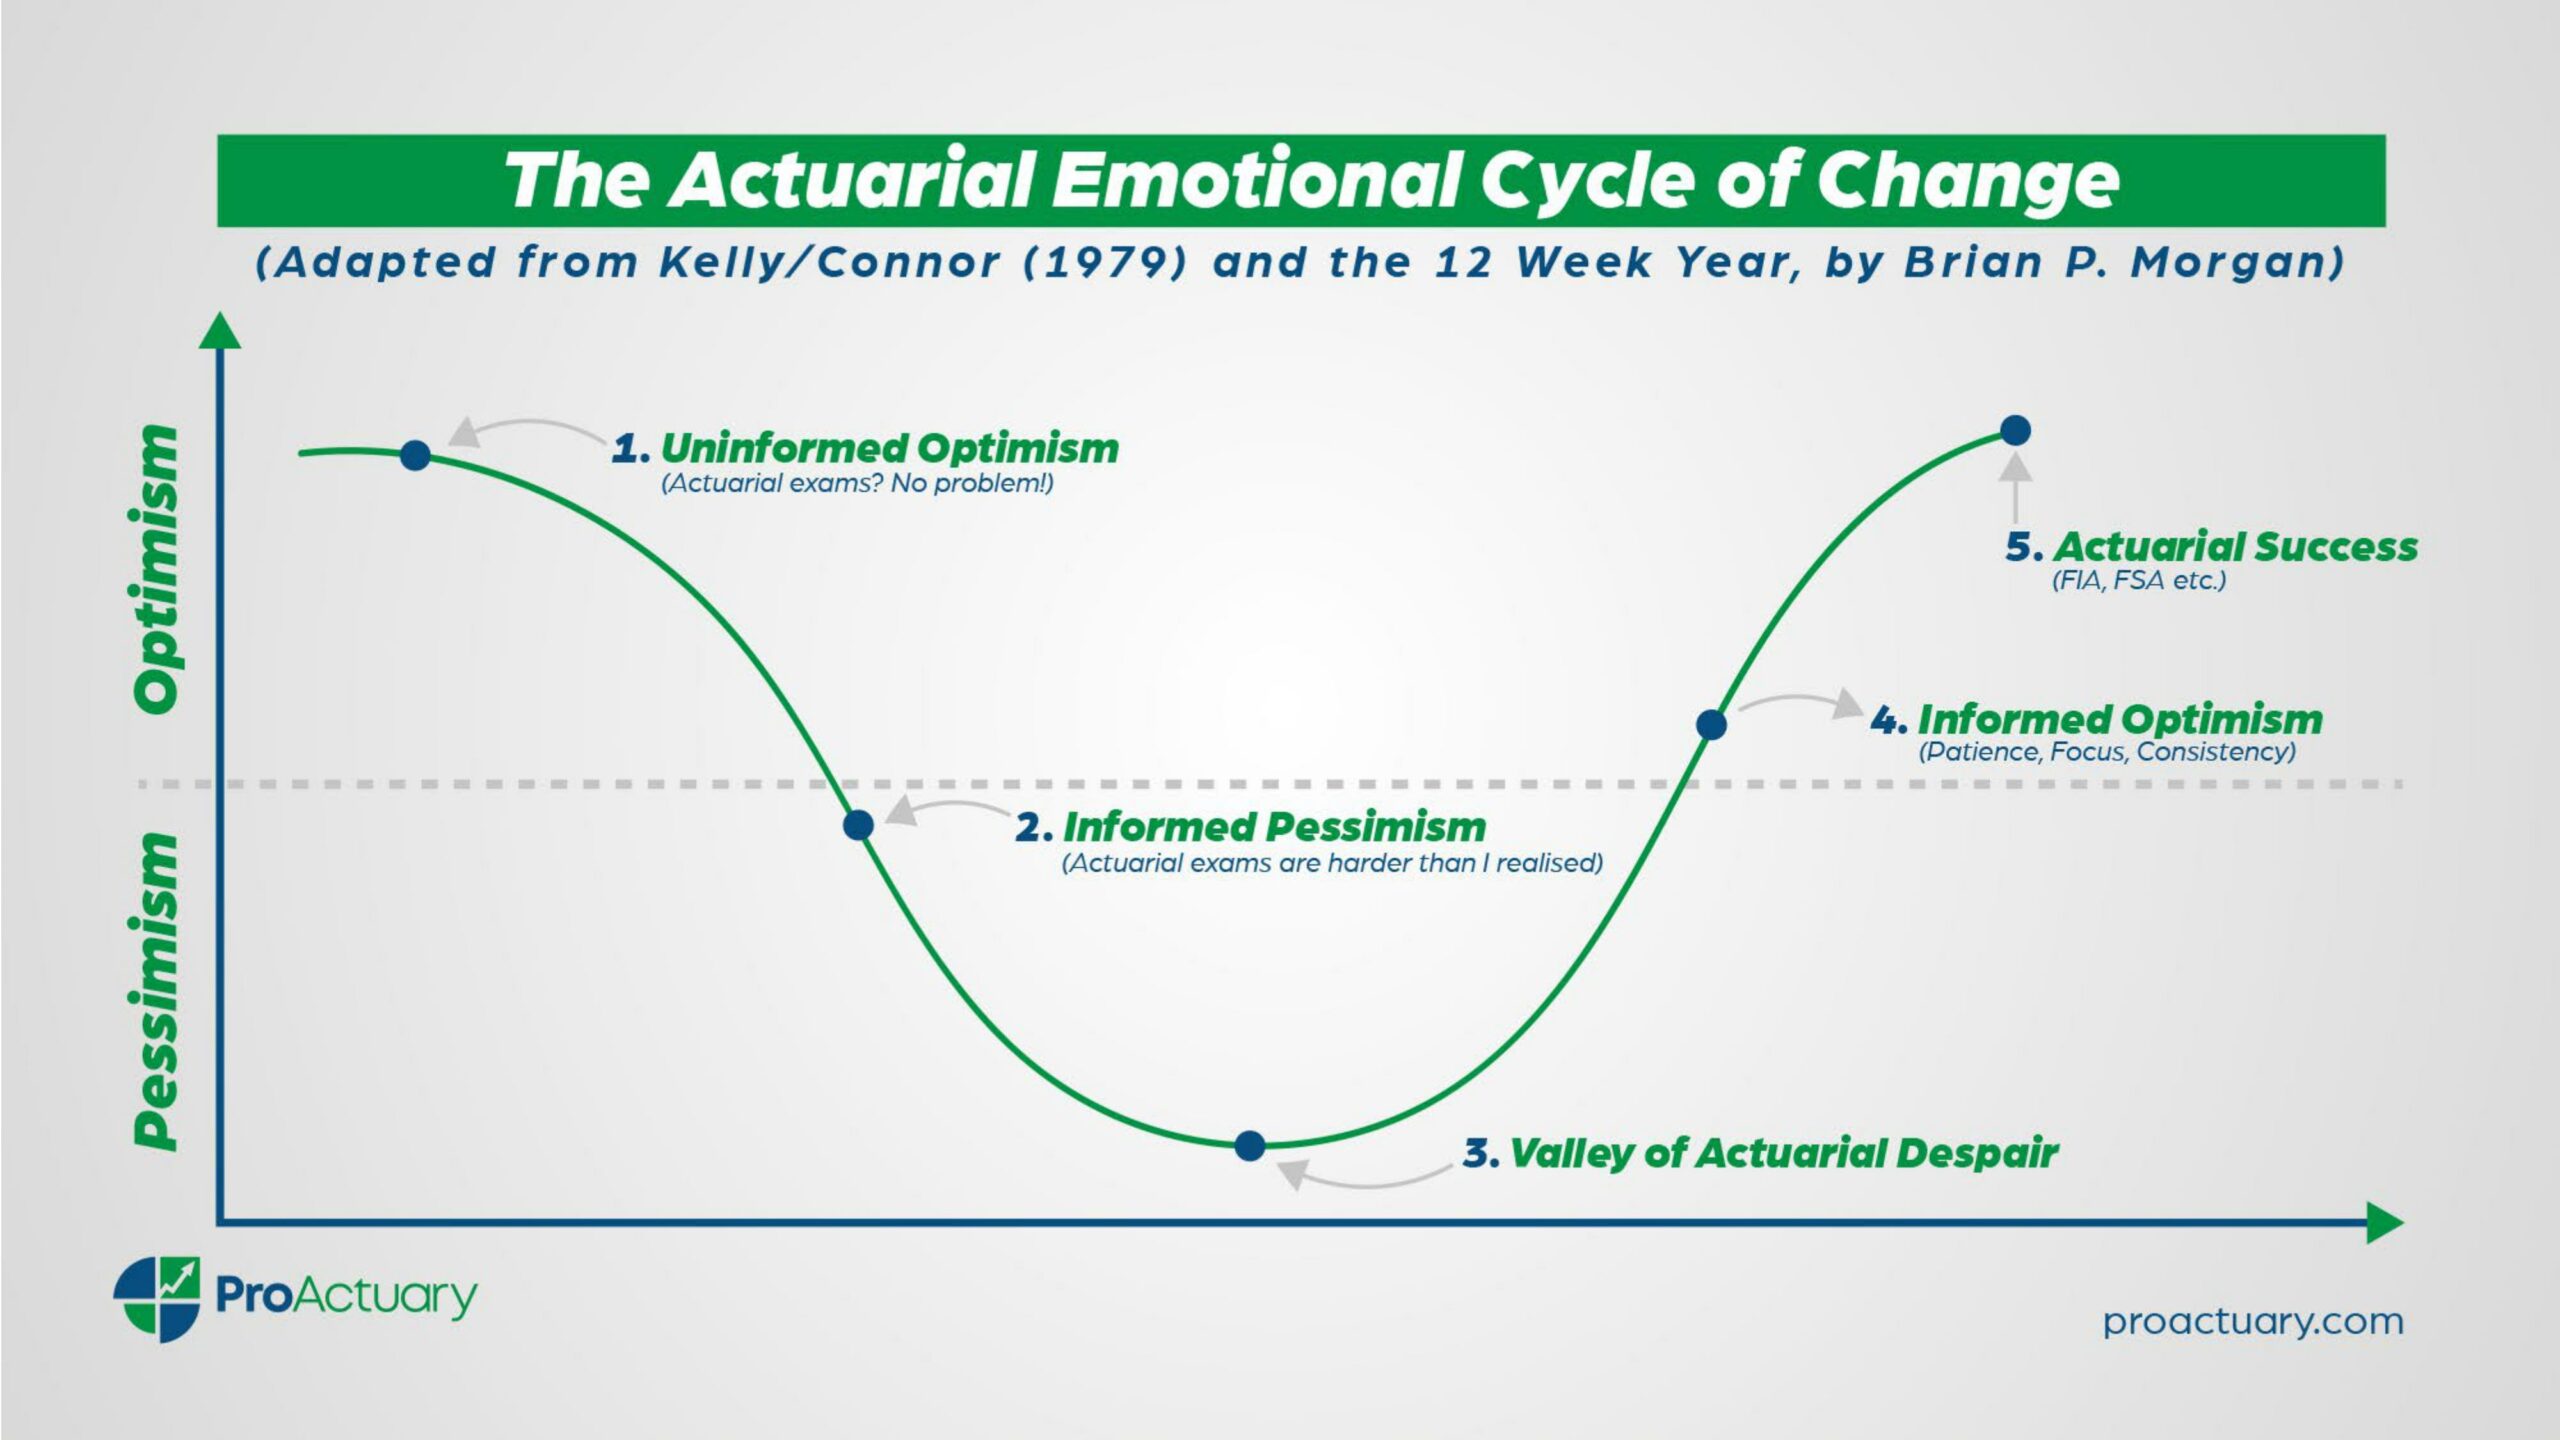 The Actuarial Emotional Cycle of Change